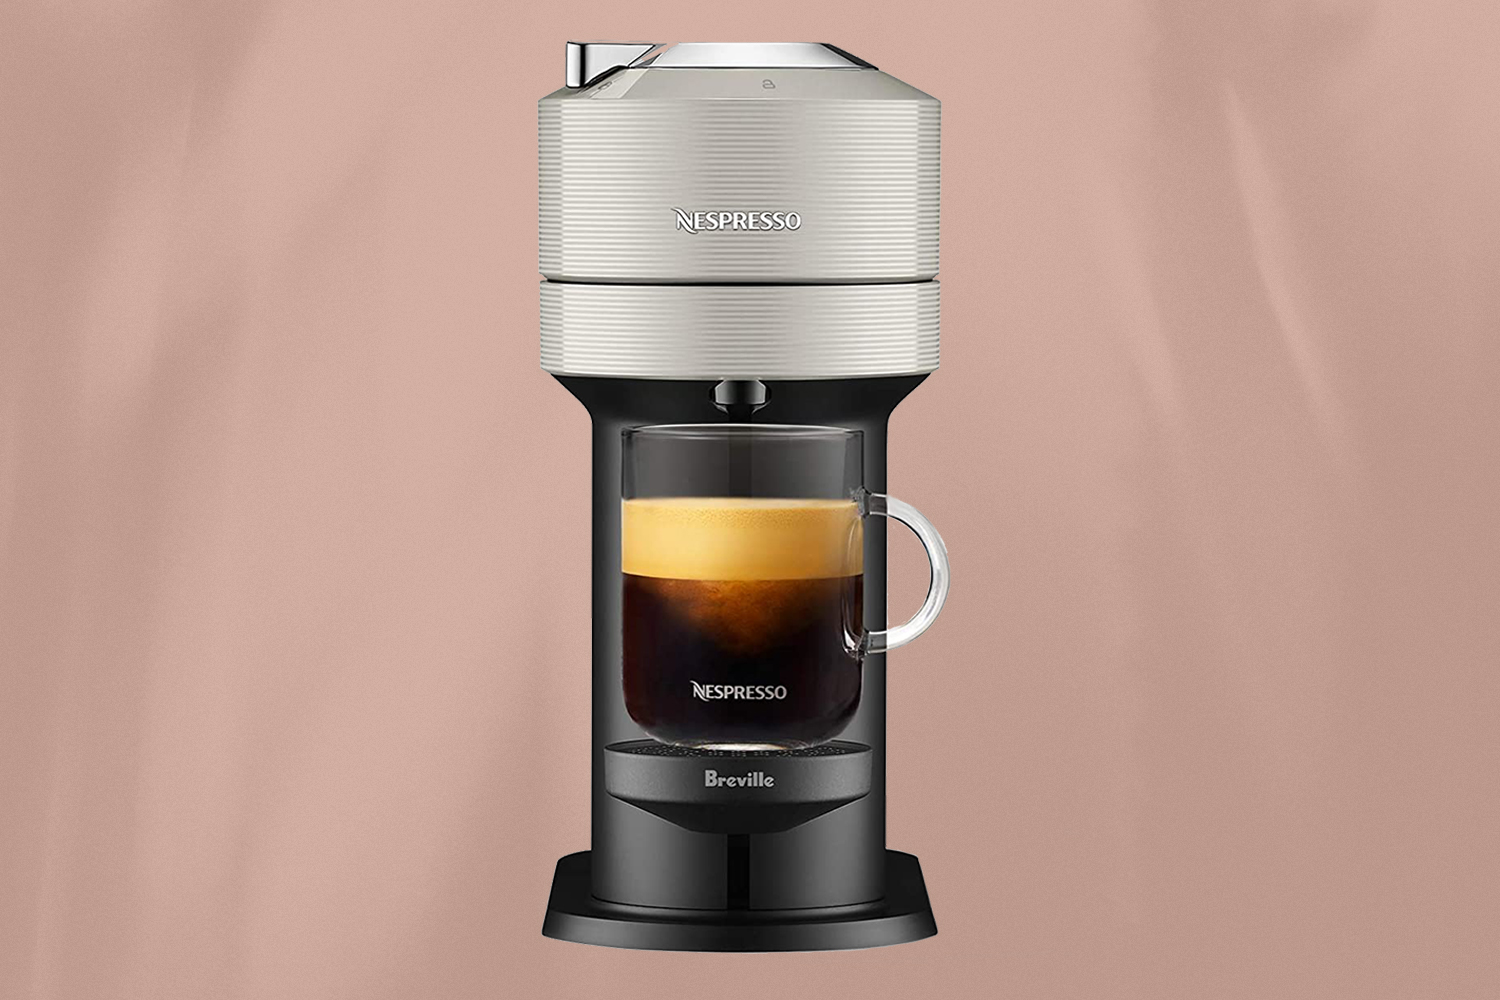 Two Nespresso Coffee Makers Are 50 Off at Amazon InsideHook